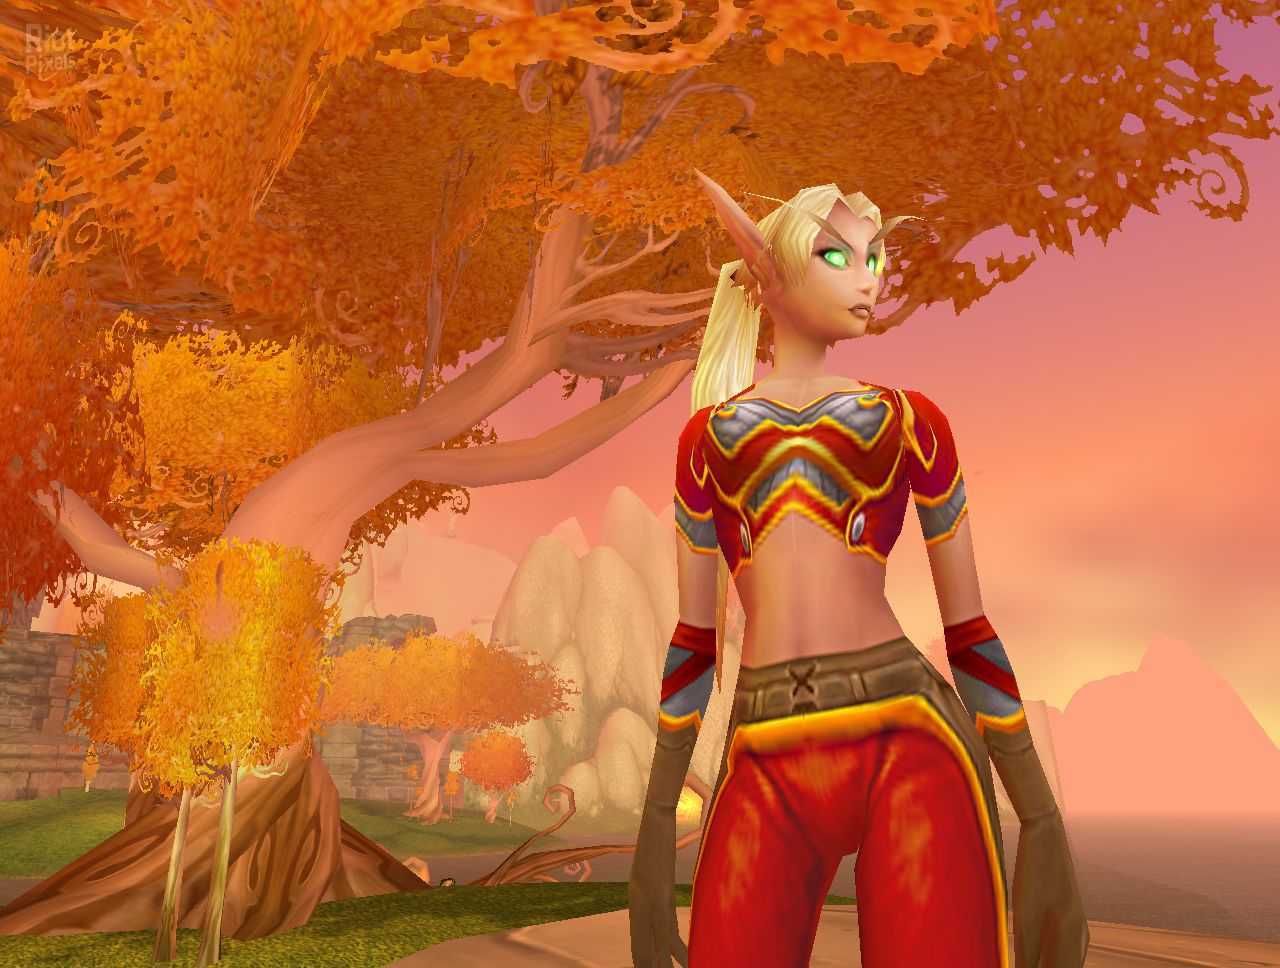 Get to 70 fast with this world of warcraft: burning crusade classic leveling guide